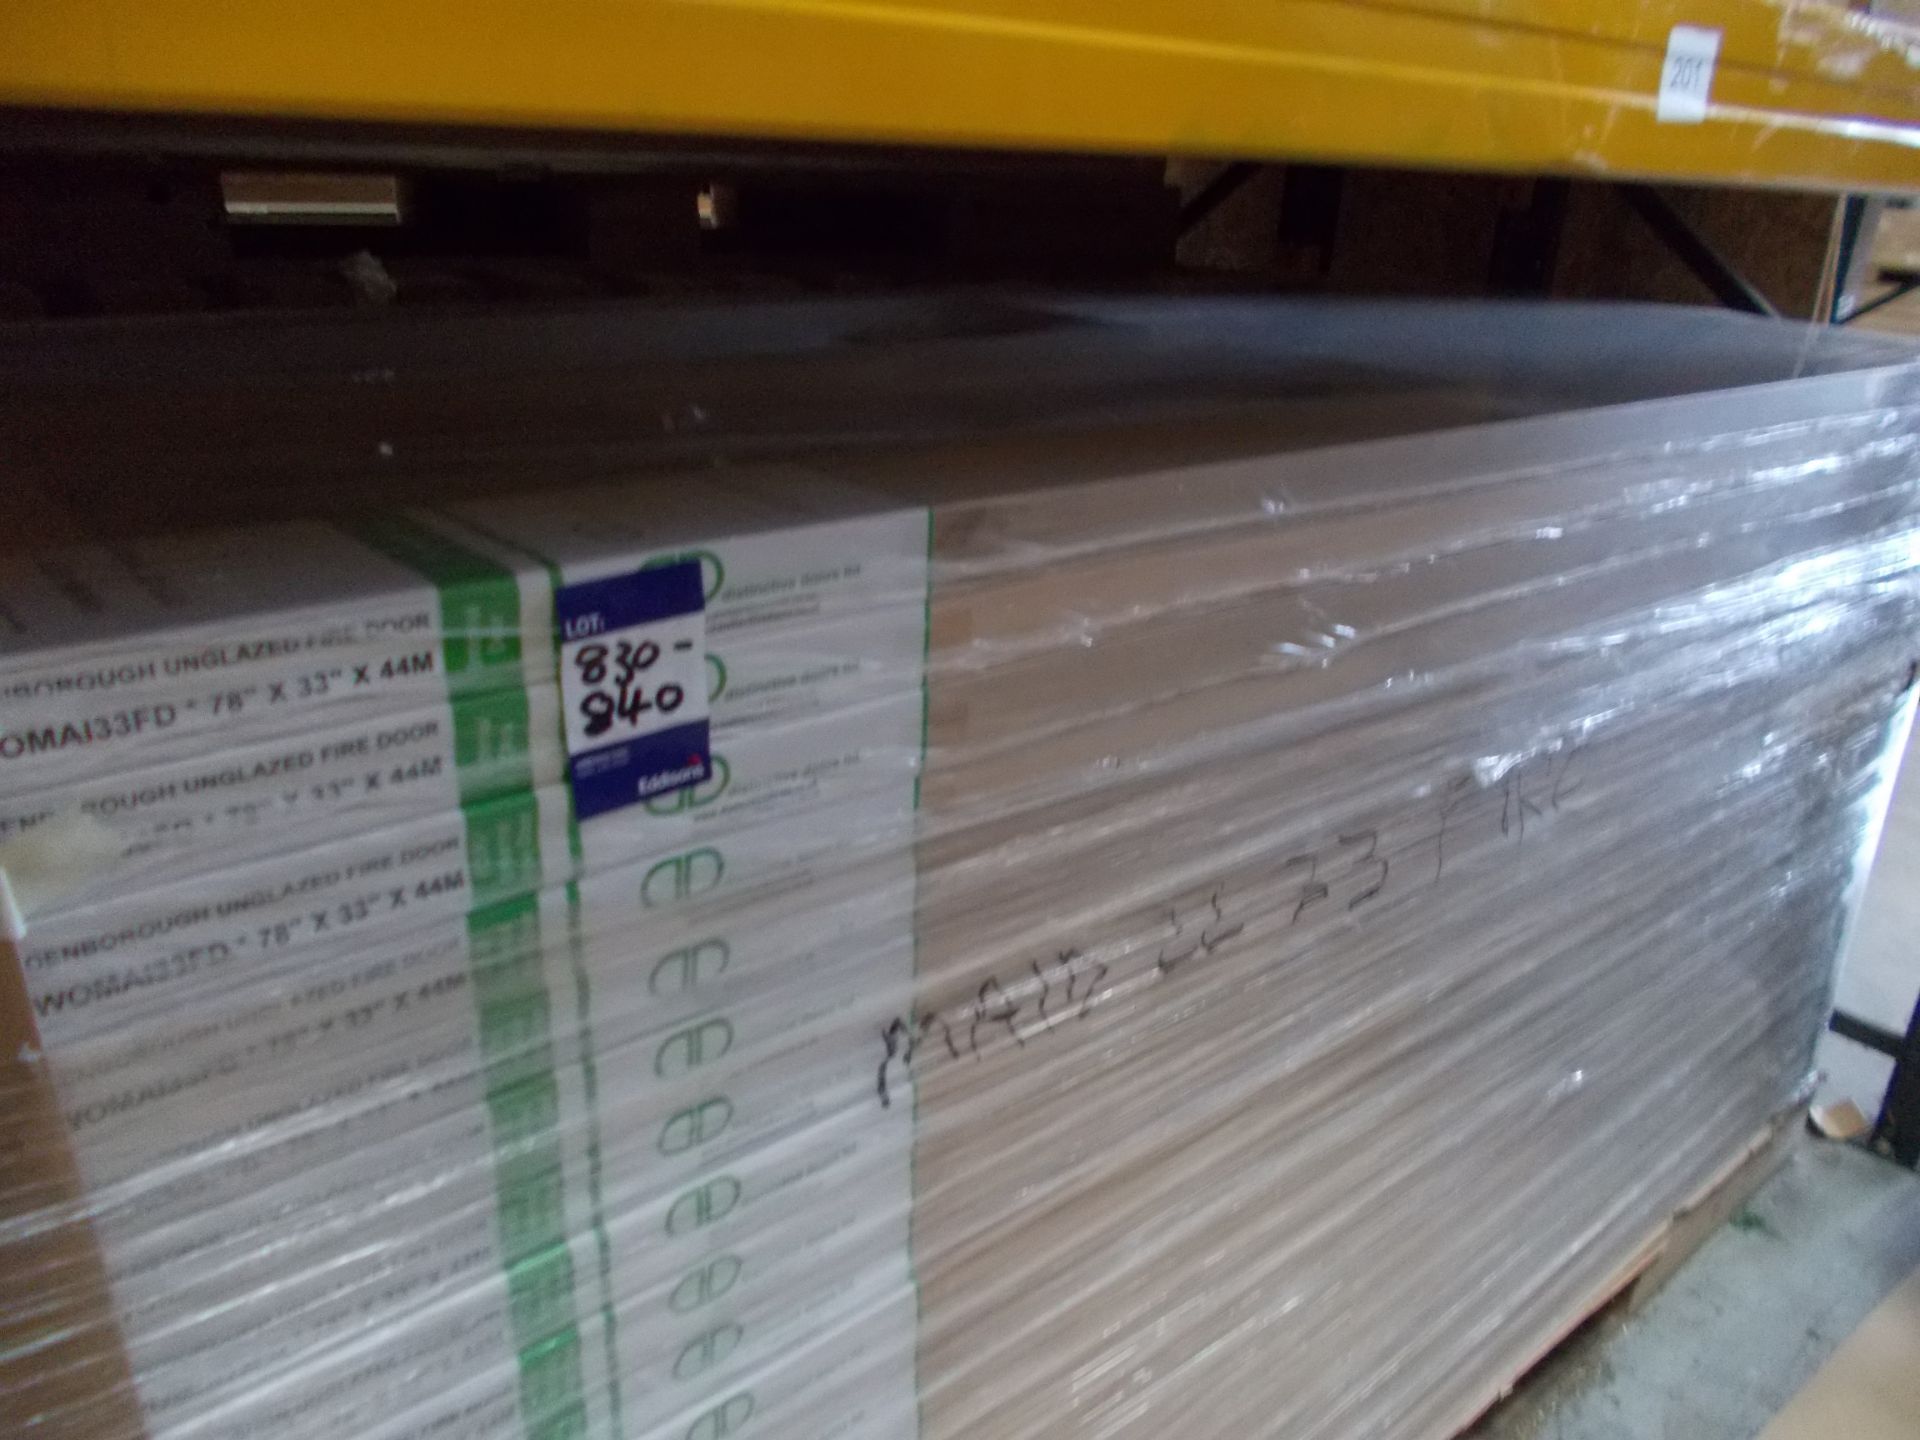 2 x Maidenborough Unglazed Fire Door AWOMA133FD 78”x33”x44mm - Lots to be handed out in order they - Image 3 of 4